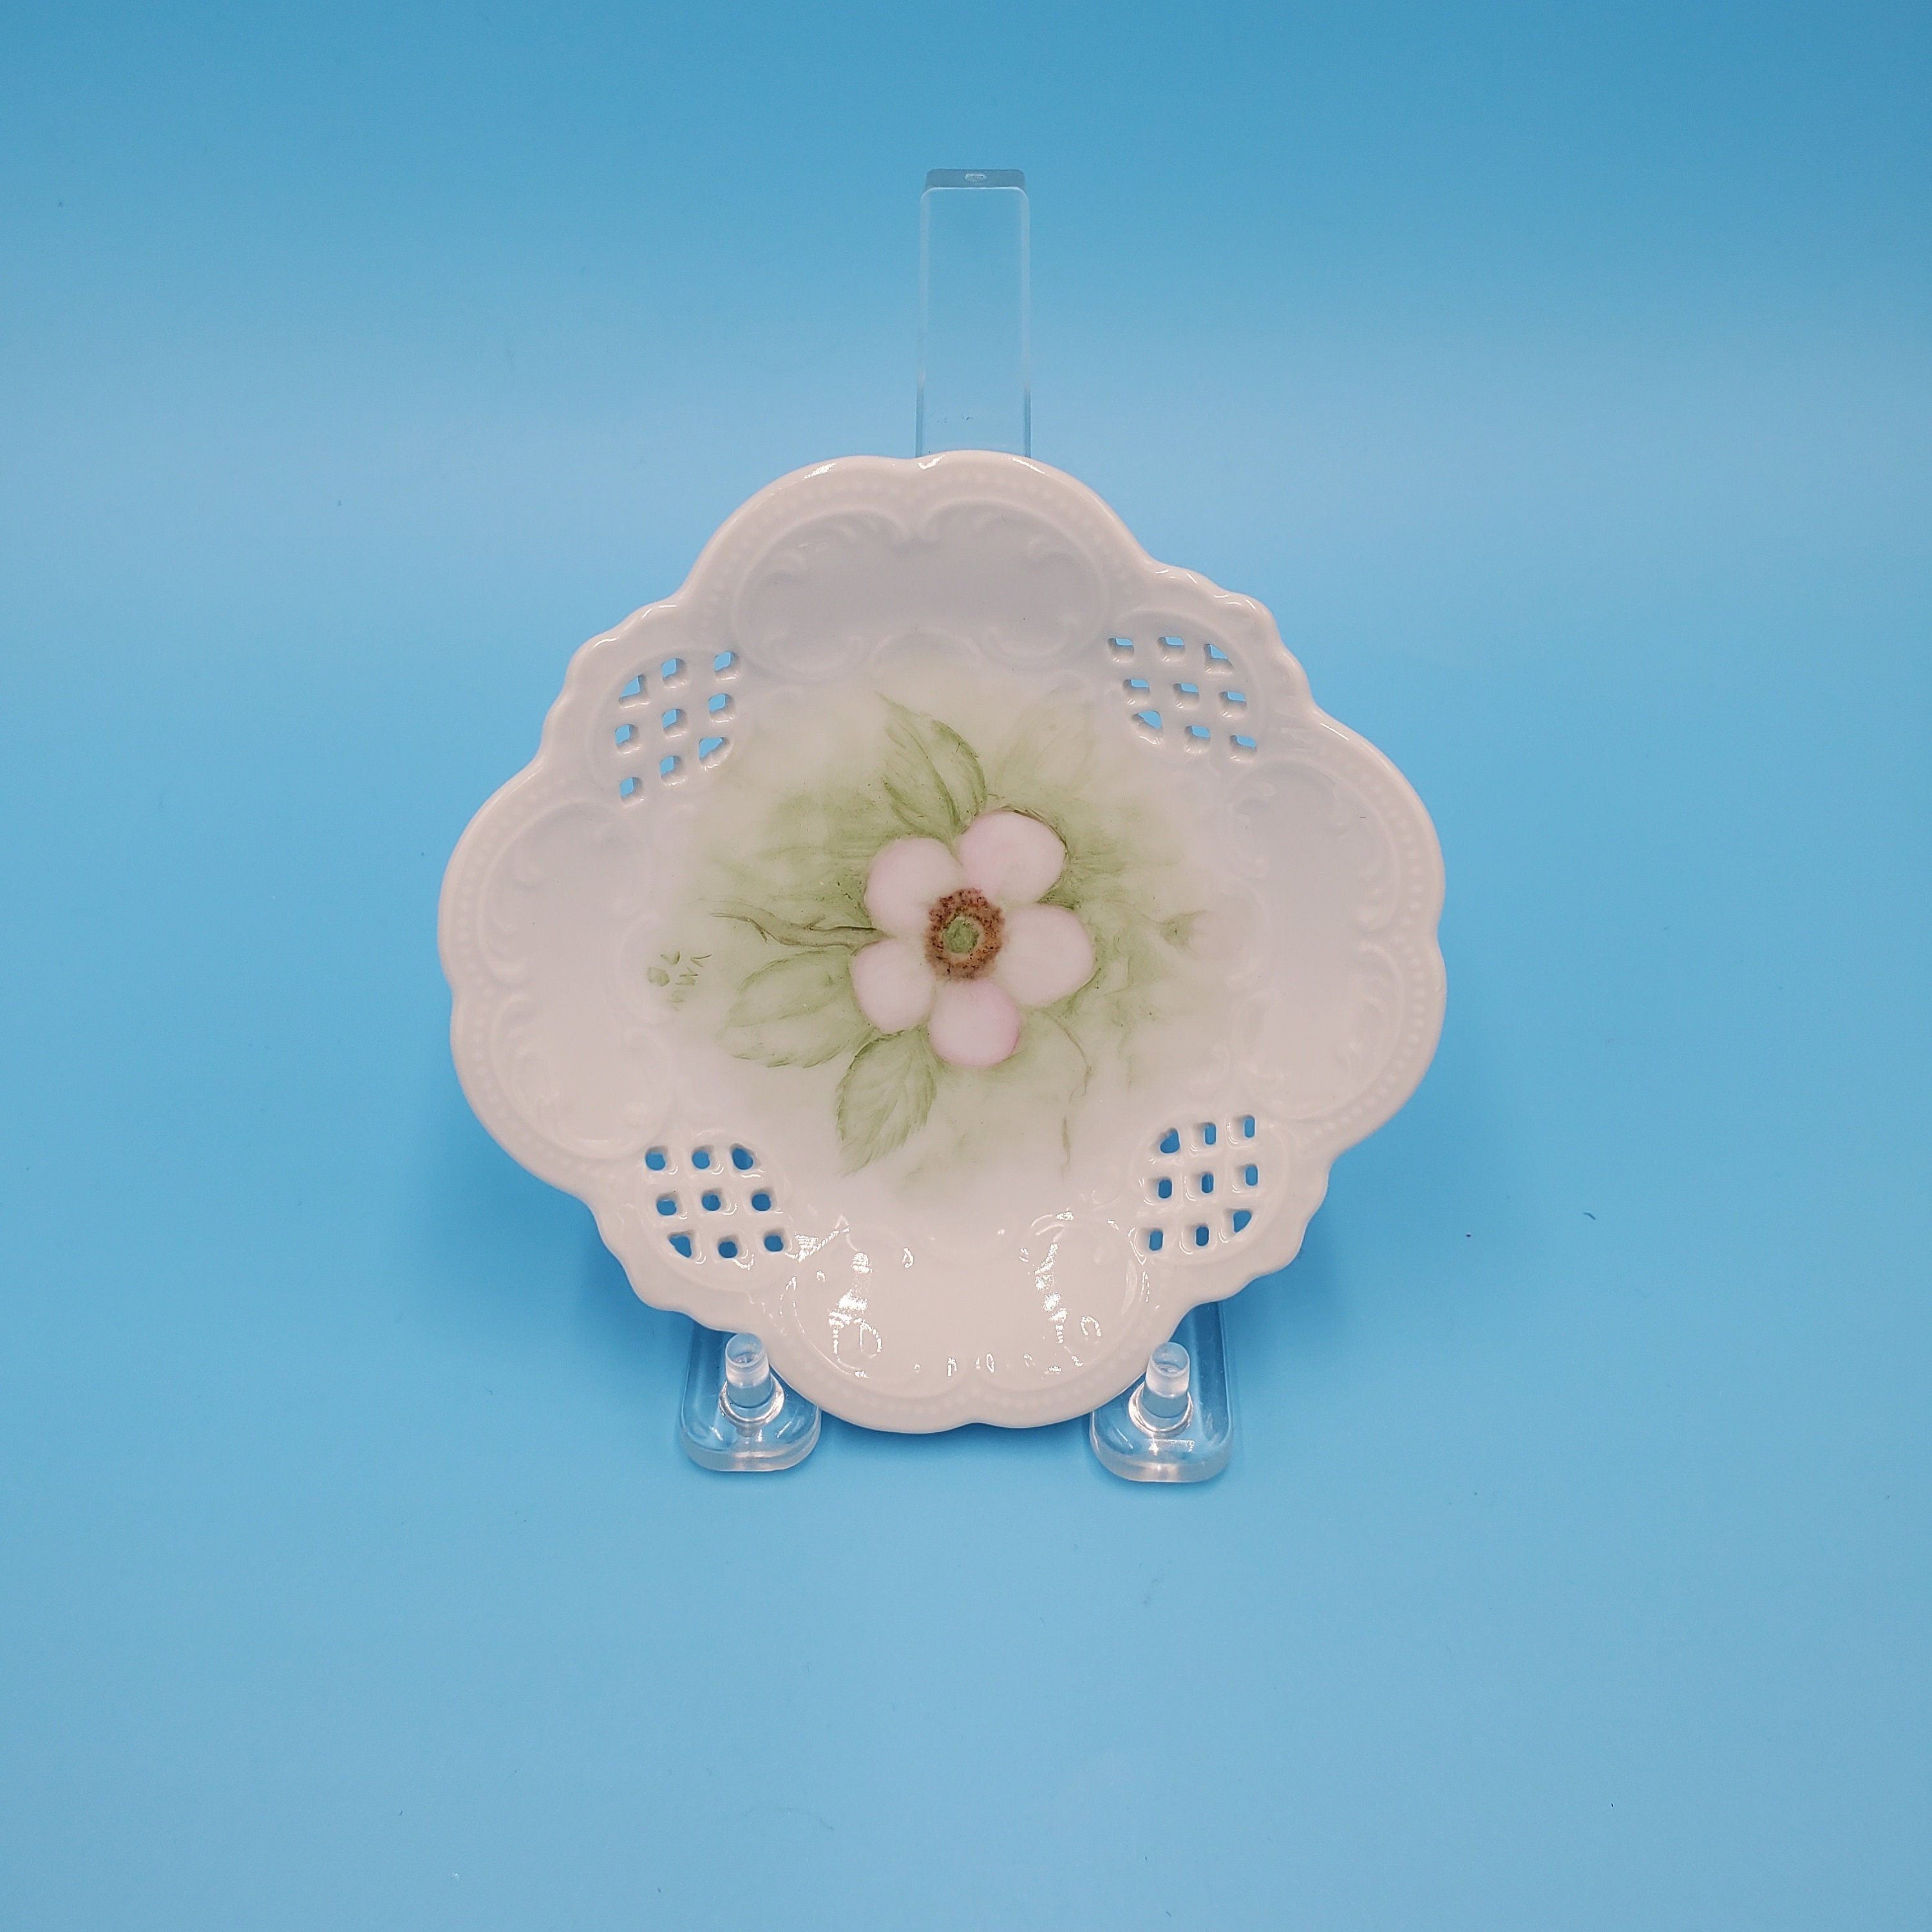 Small Reticulated Floral Plate; Small White Trinket Plate